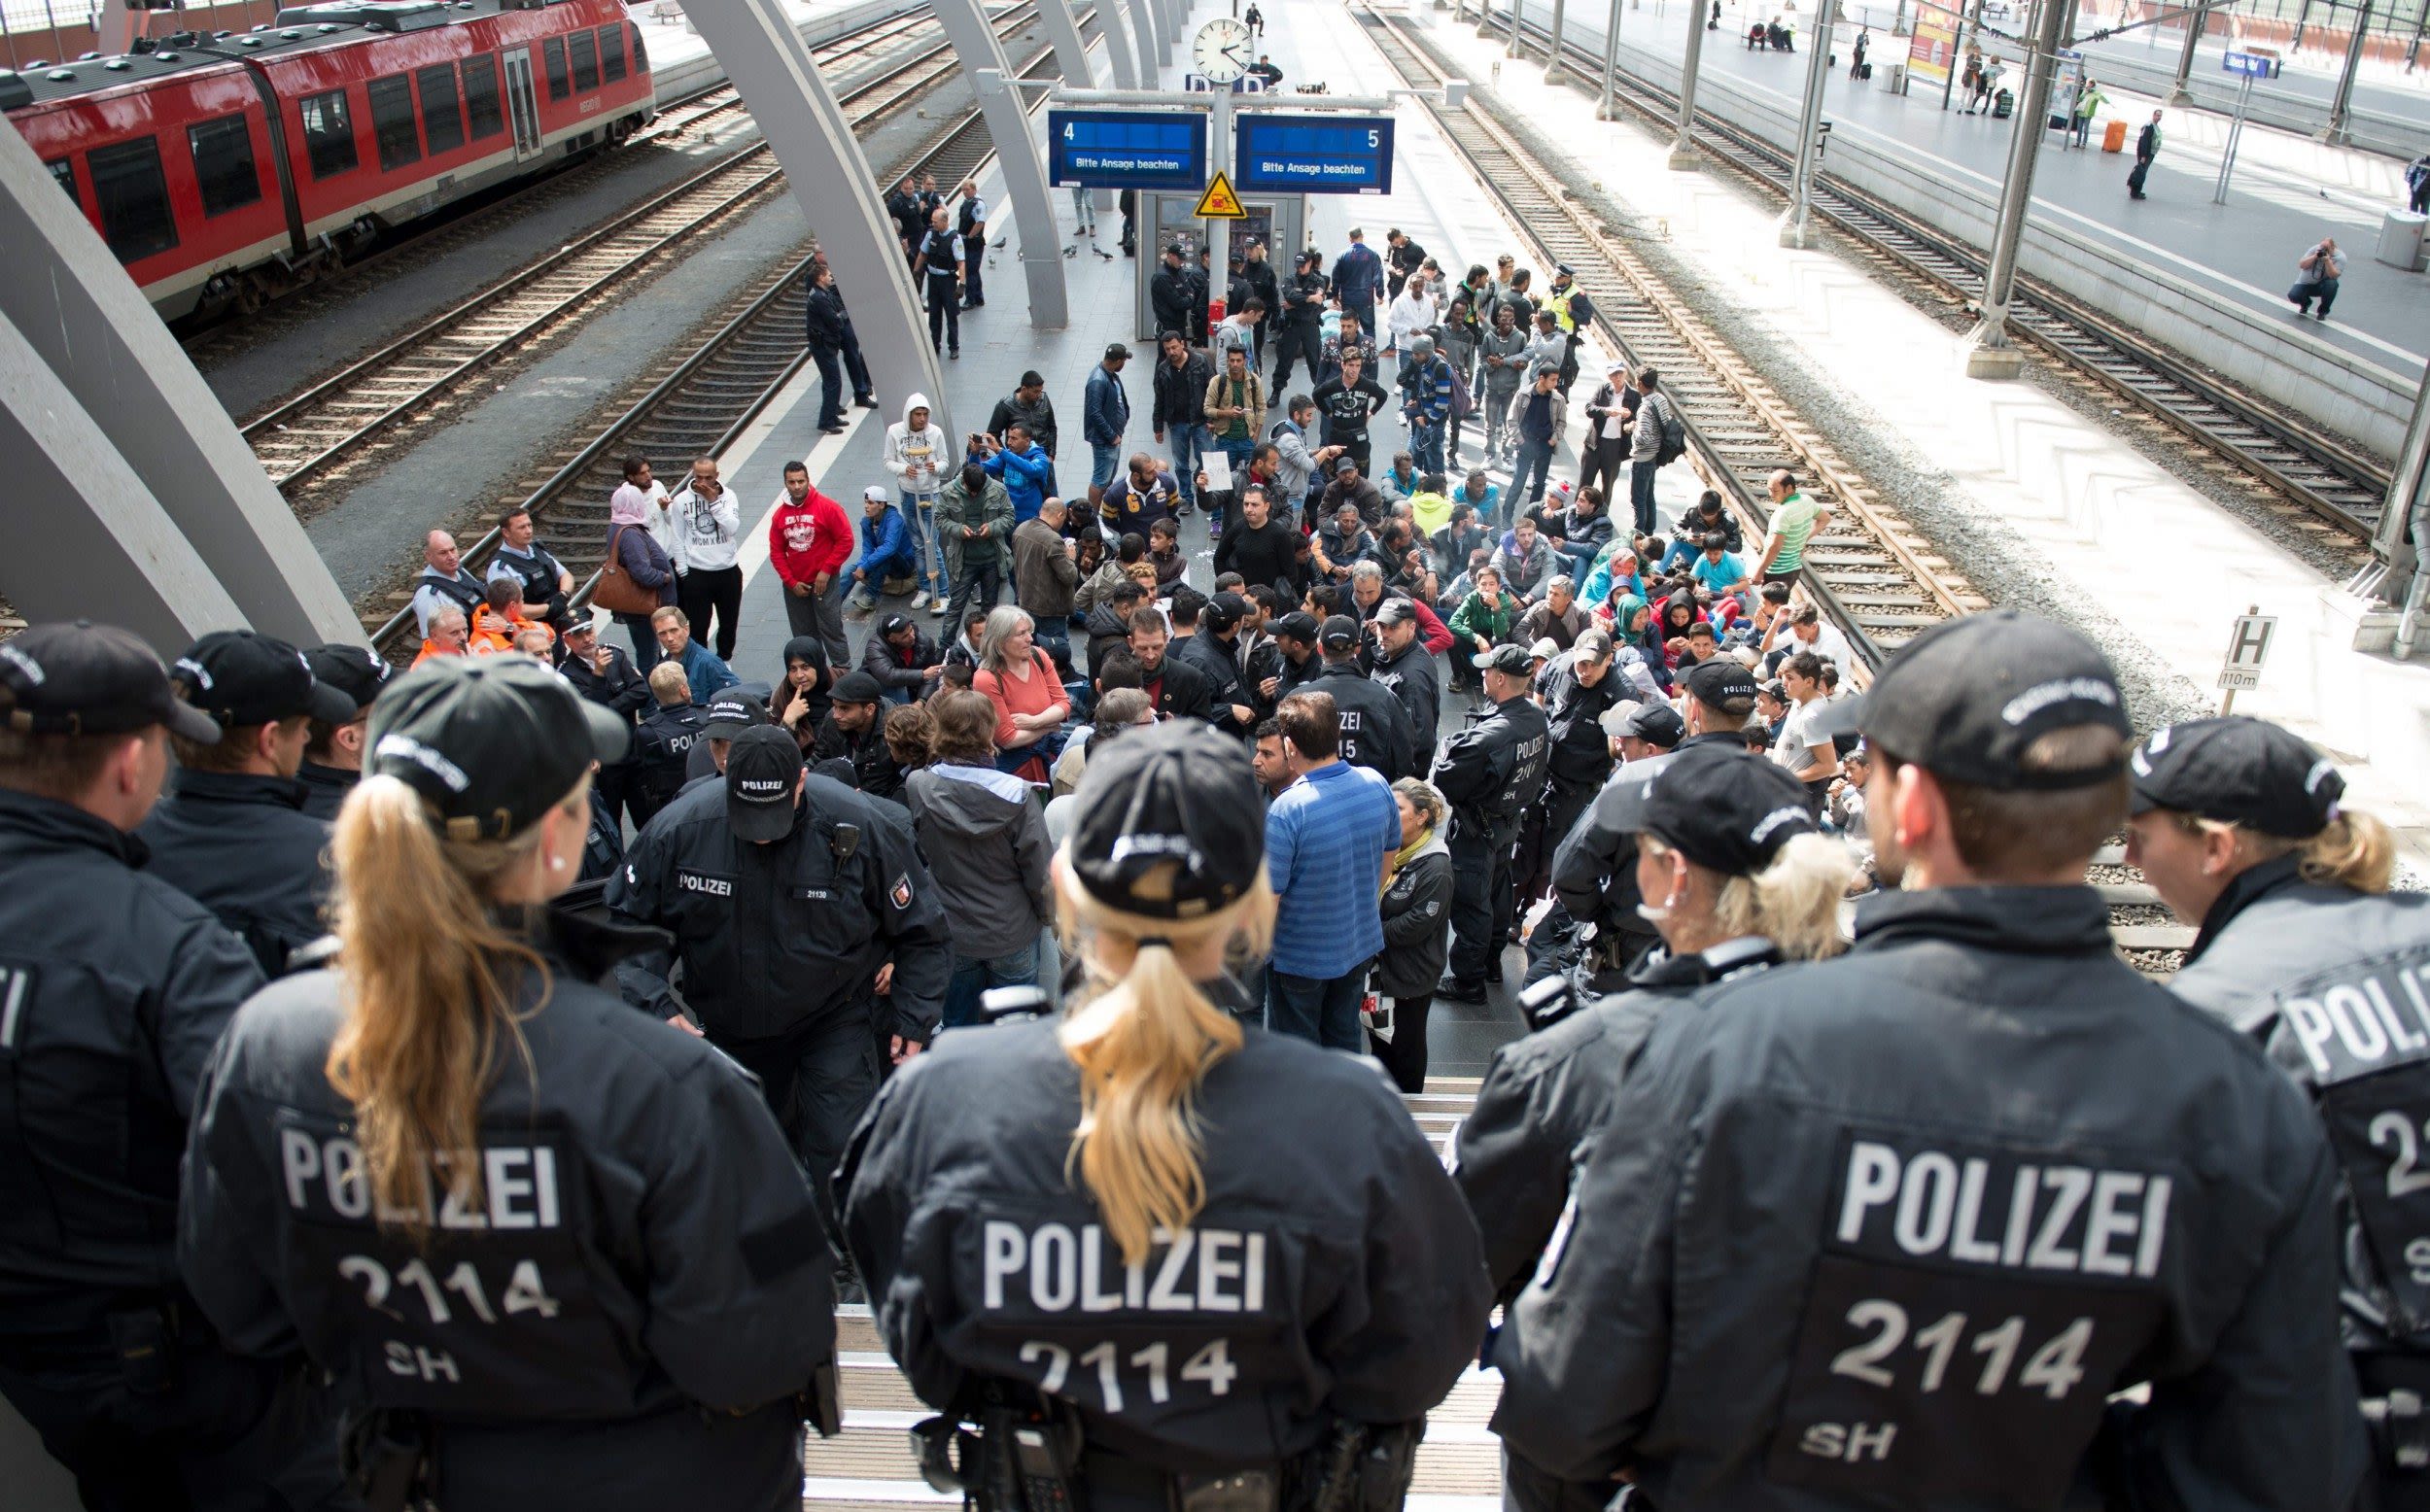 Visitors to Germany are shocked at how far the country has fallen